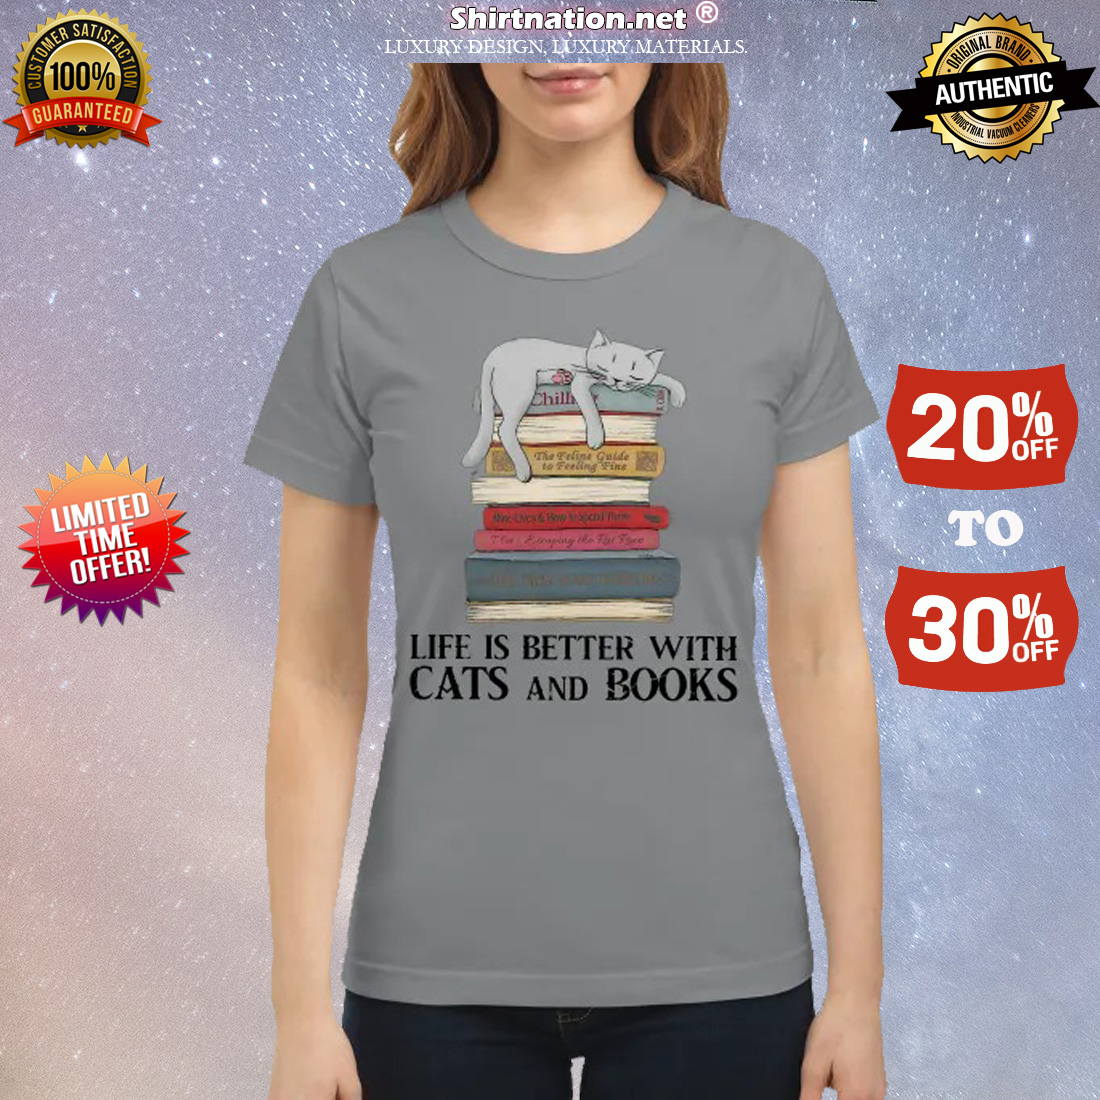 Life is better with cats and books classic shirt